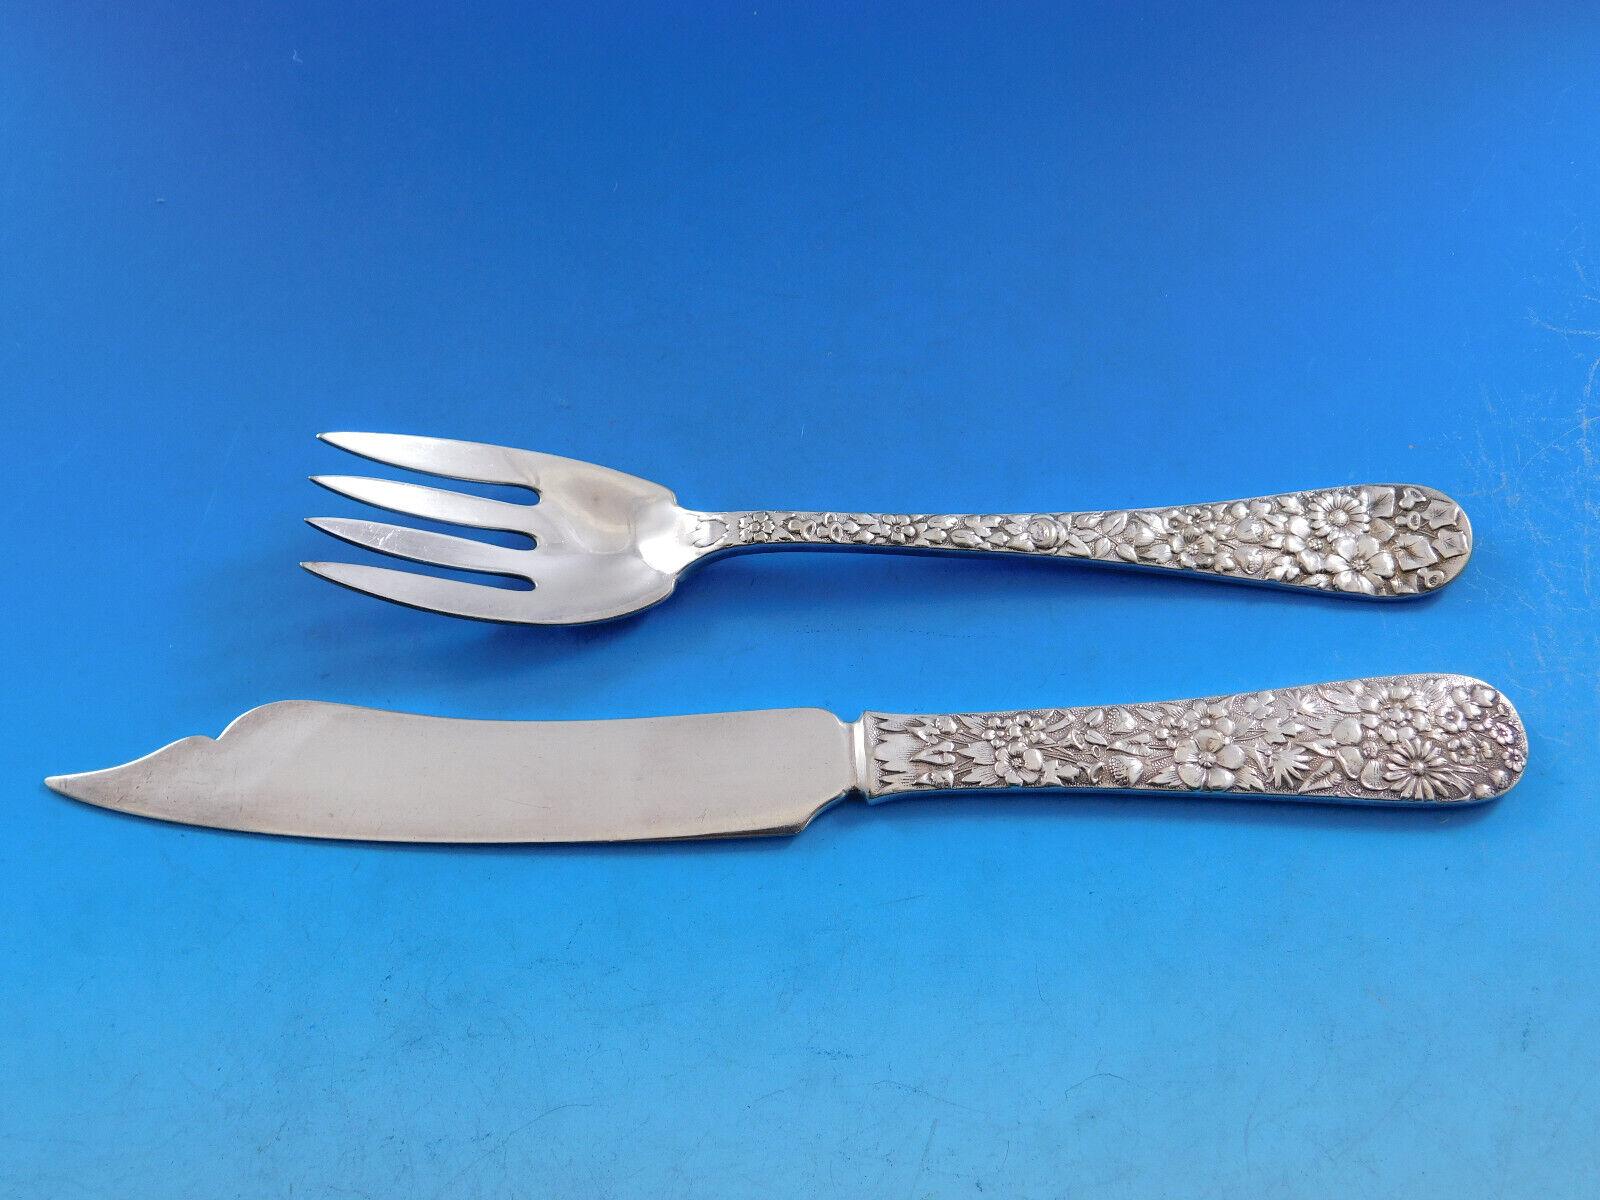 Floral by Tiffany and Co., patented in 1884, silverplated Individual Fish set with repousse design - 24 pieces. This set includes:

12 flat handle fish knives, 8